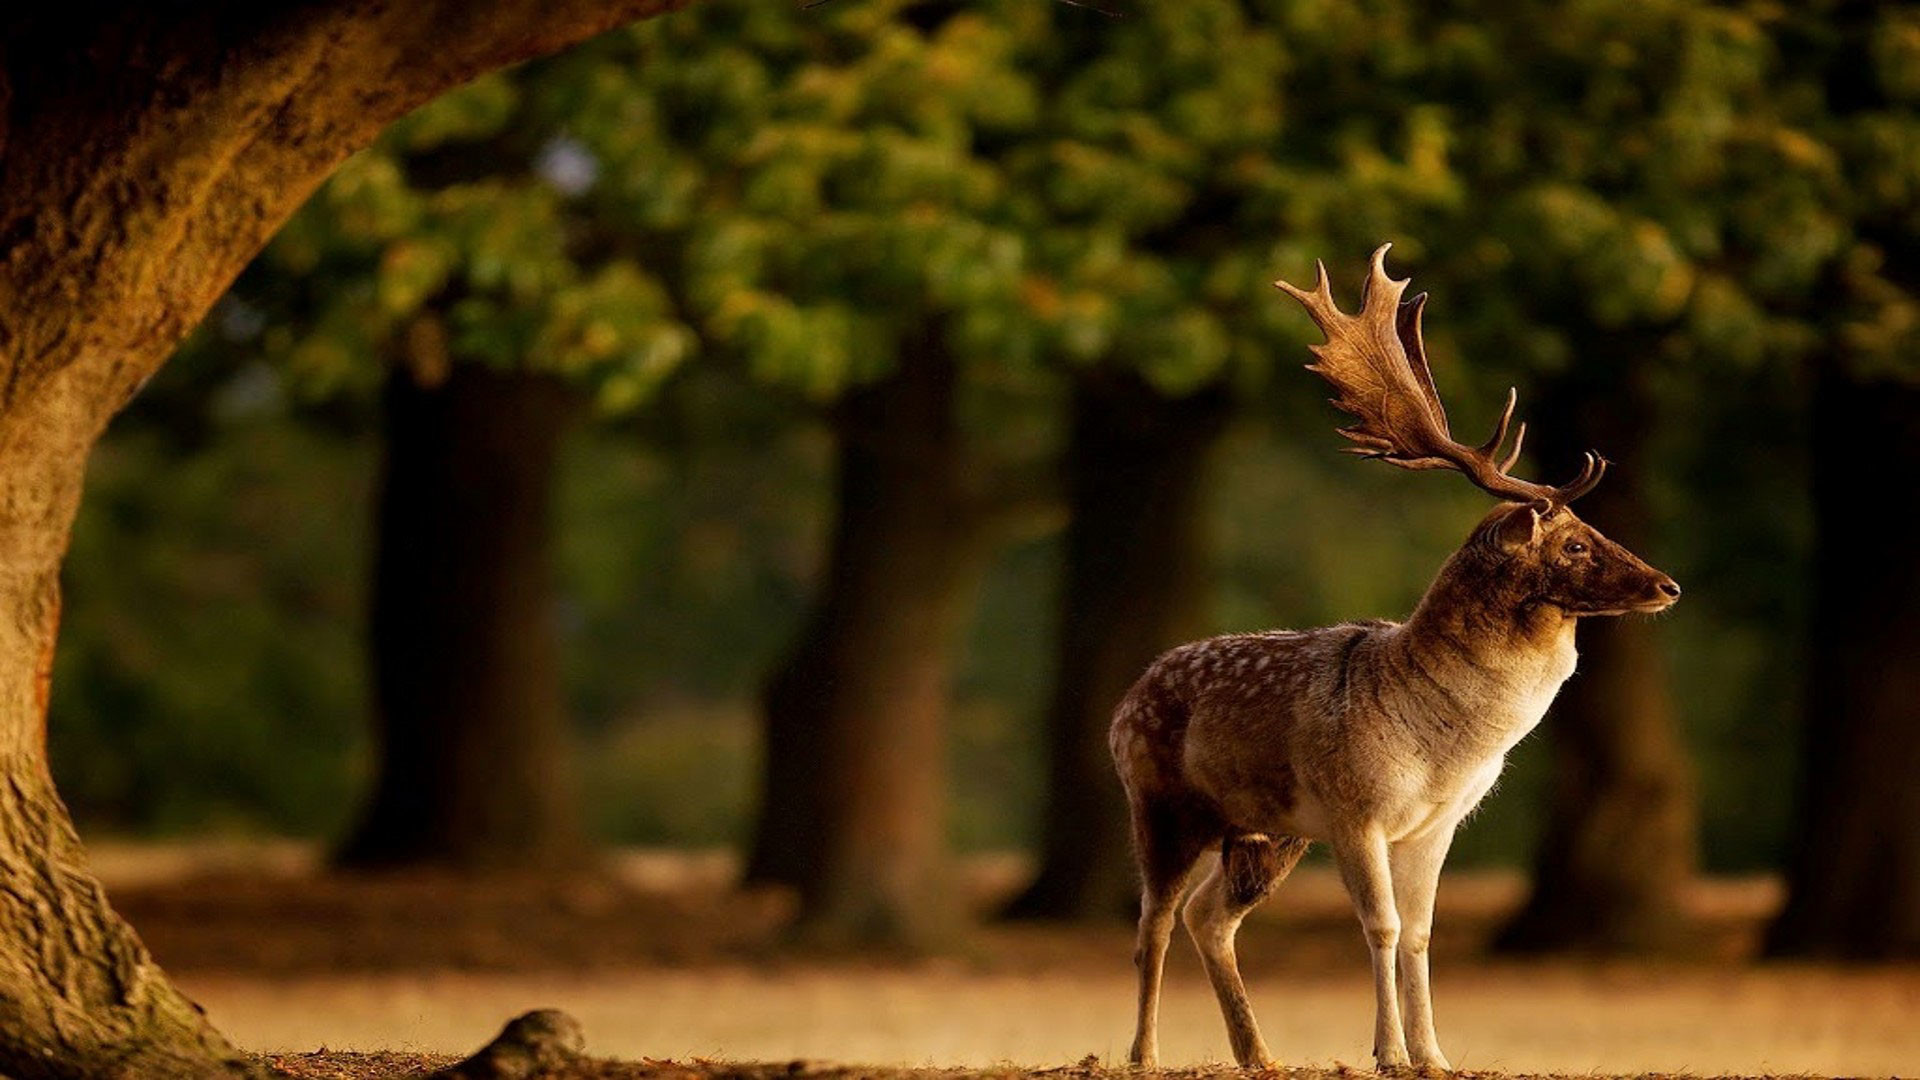 Hd Pics Photos Beautiful Deer Male Big Horn Forest - National Geographic Photo Composition Rule Of Thirds - HD Wallpaper 